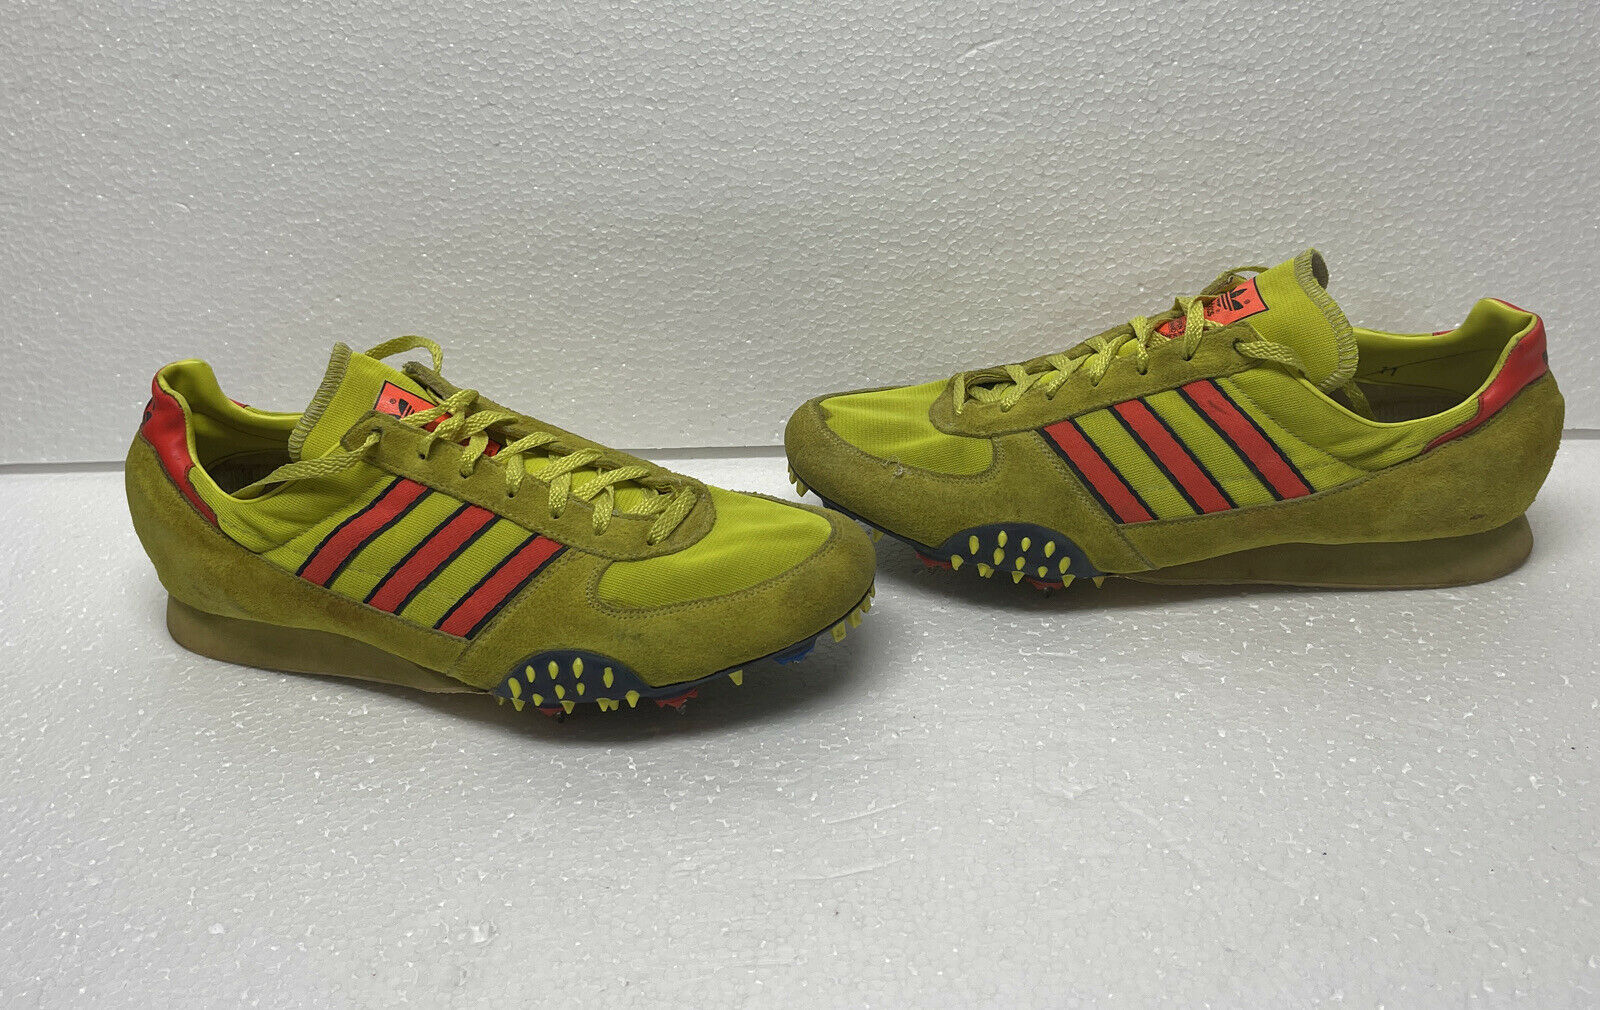 Vintage Men's Adidas Track Shoes with Spikes Size: 11